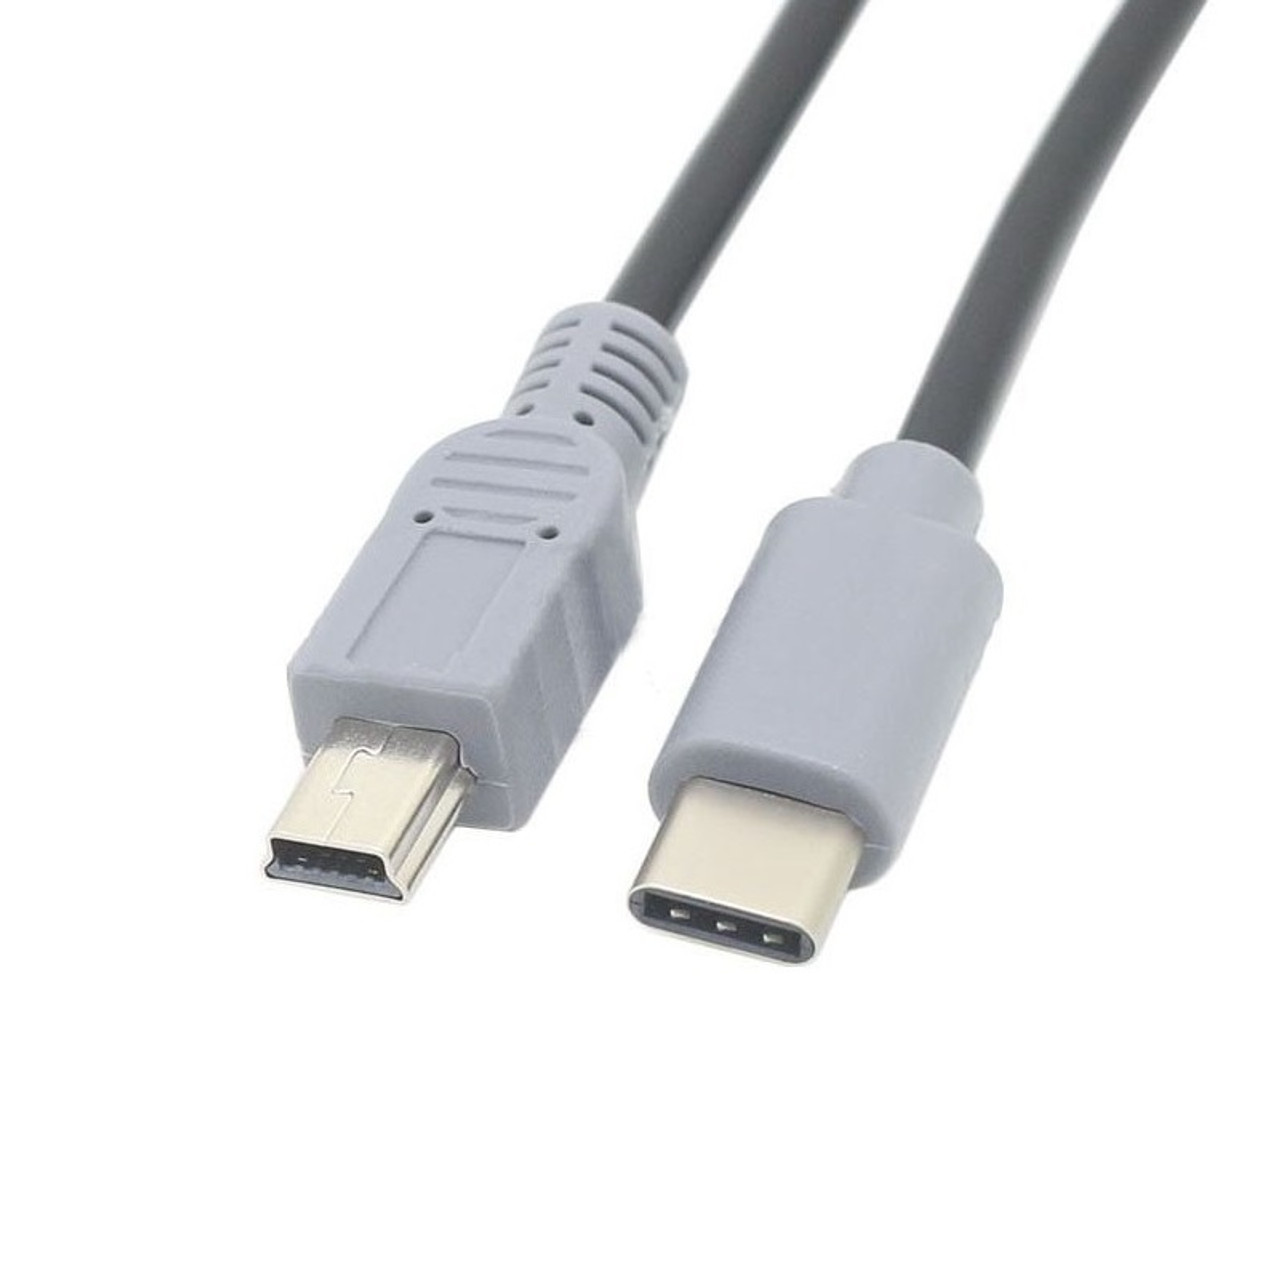 USB Type-C Male to Mini USB Male Adapter Cable USB-C OTG Data Sync Power Supply Charger Cord 25CM 1M